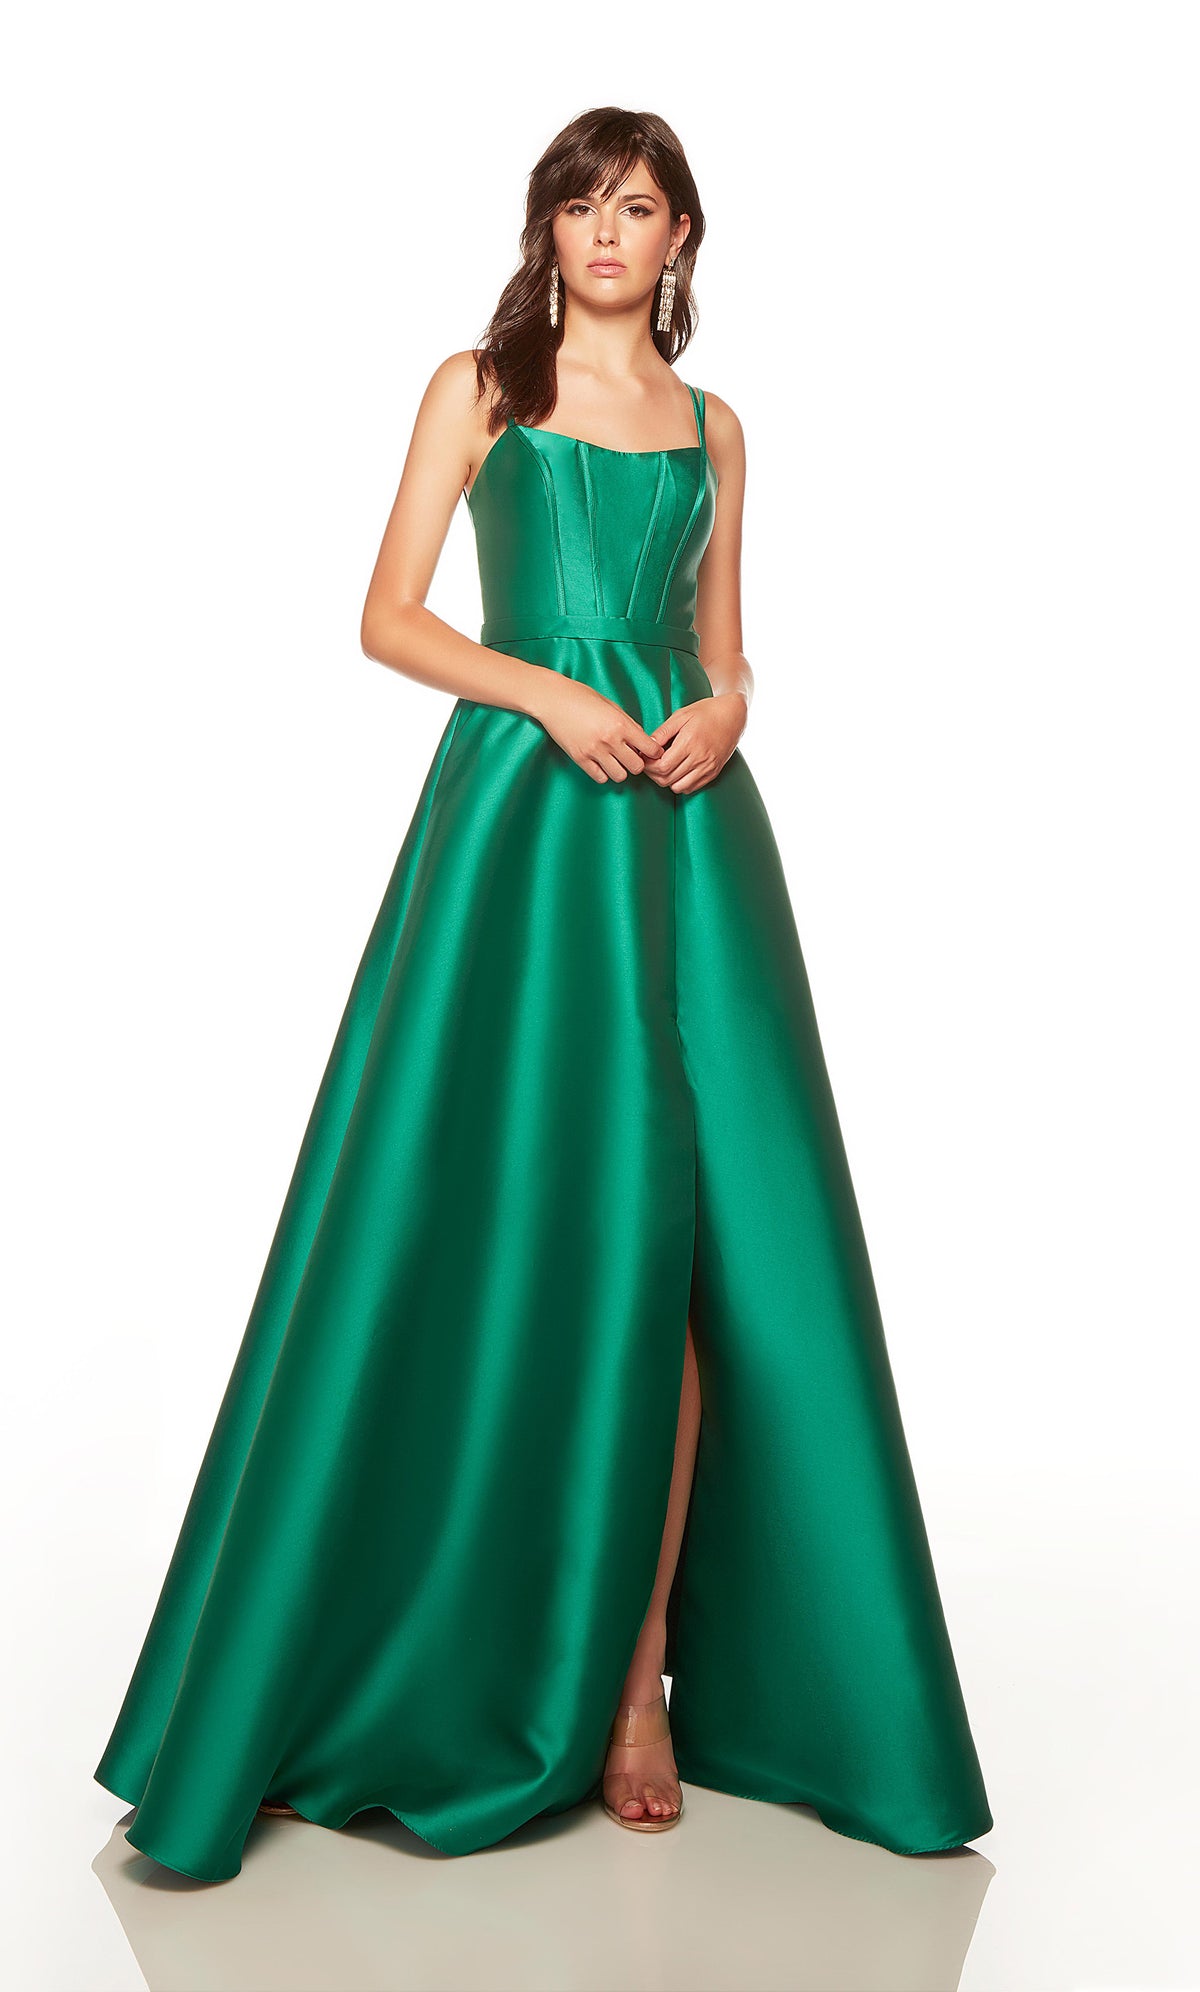 Emerald green prom dress with a scooped neck, corset bodice, belt, and side slit. COLOR-SWATCH_1759__EMERALD